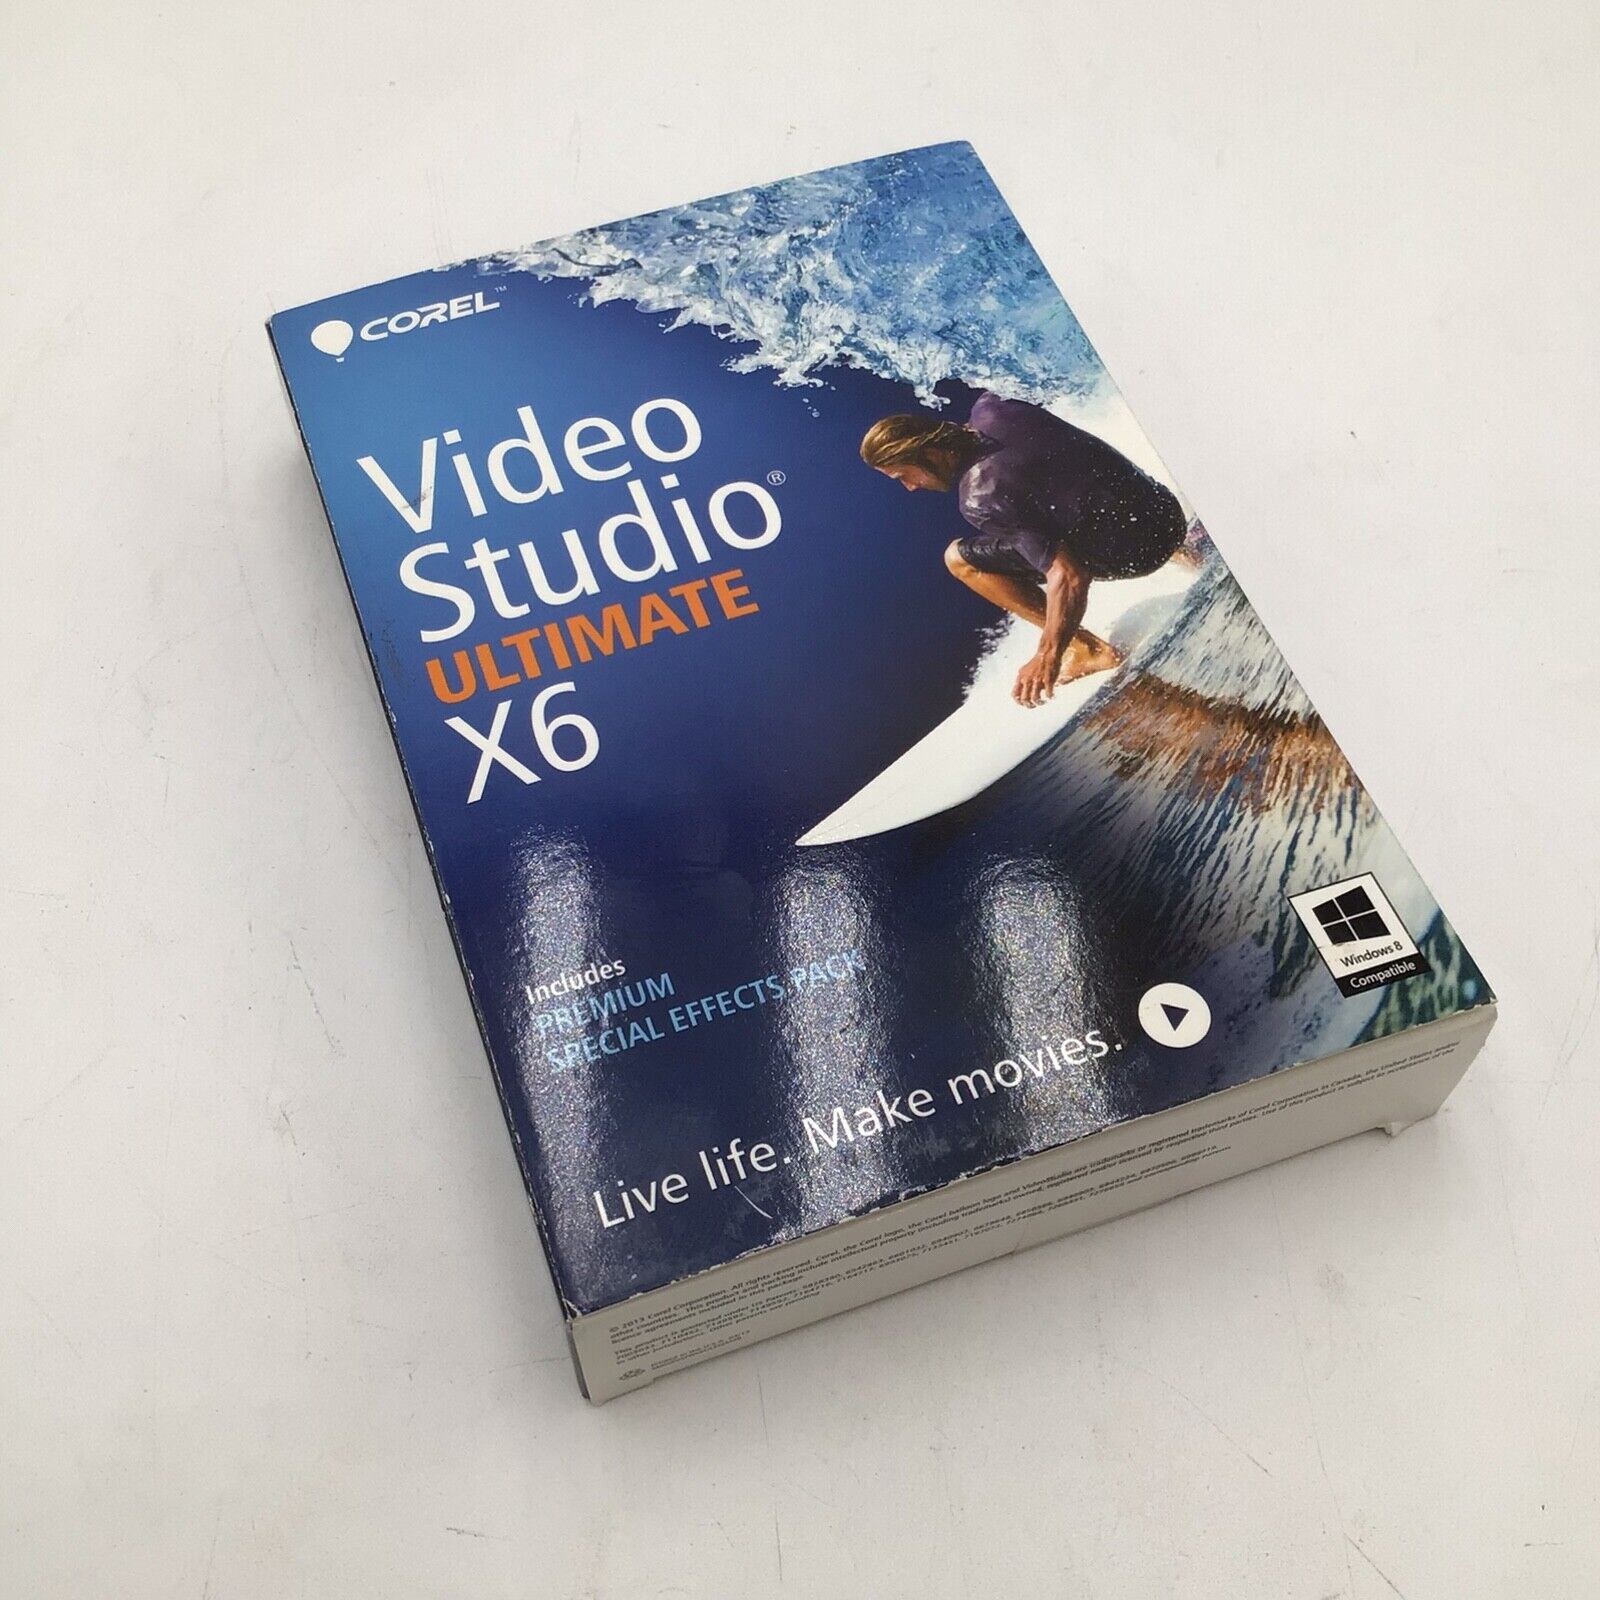 Corel VideoStudio Ultimate X6 With Premium Special Effects Pack